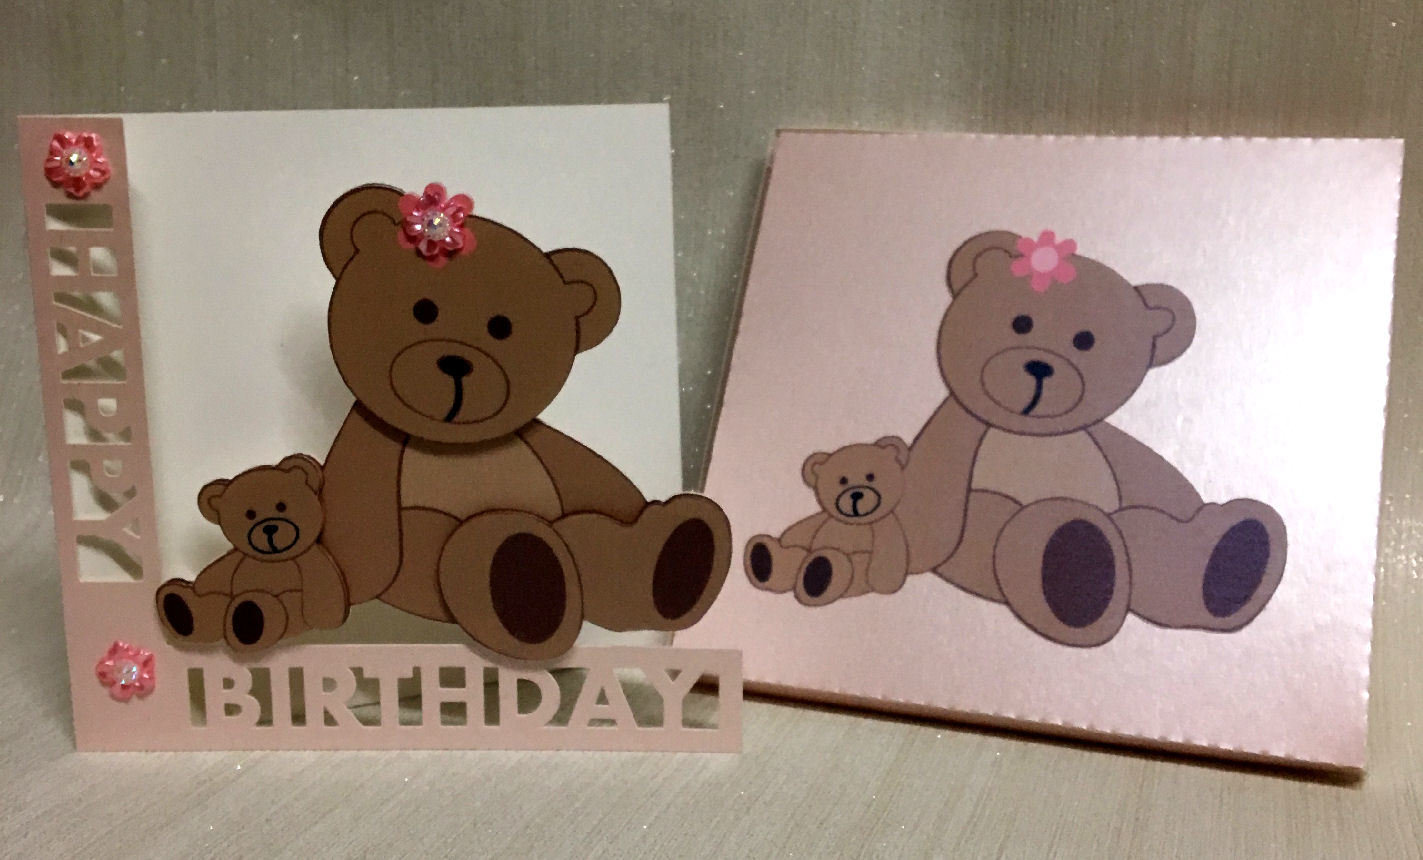 Shaped Birthday Card with Teddy detail and card box - studio format